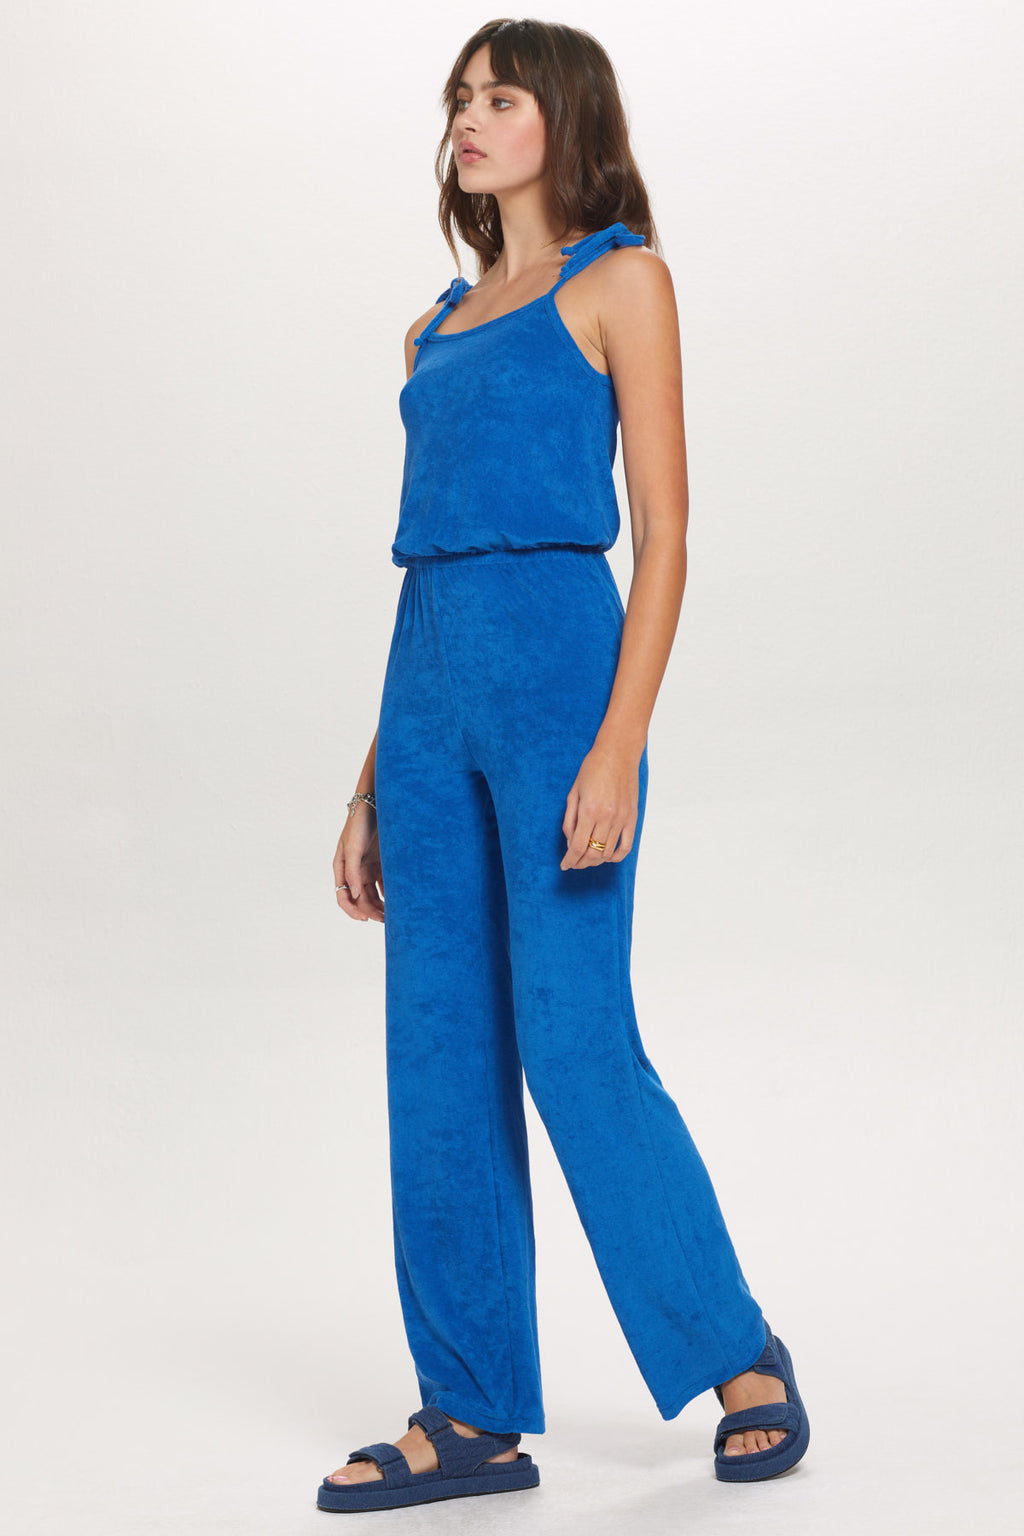  OLLOUM Fullofexpect Jumpsuit, Tuoria Womens Casual Wide-Leg  Jumpsuit with Adjusted Straps, Tuoria Jumpsuit with Pockets (Color : Light  Blue, Size : XX-Large) : Clothing, Shoes & Jewelry